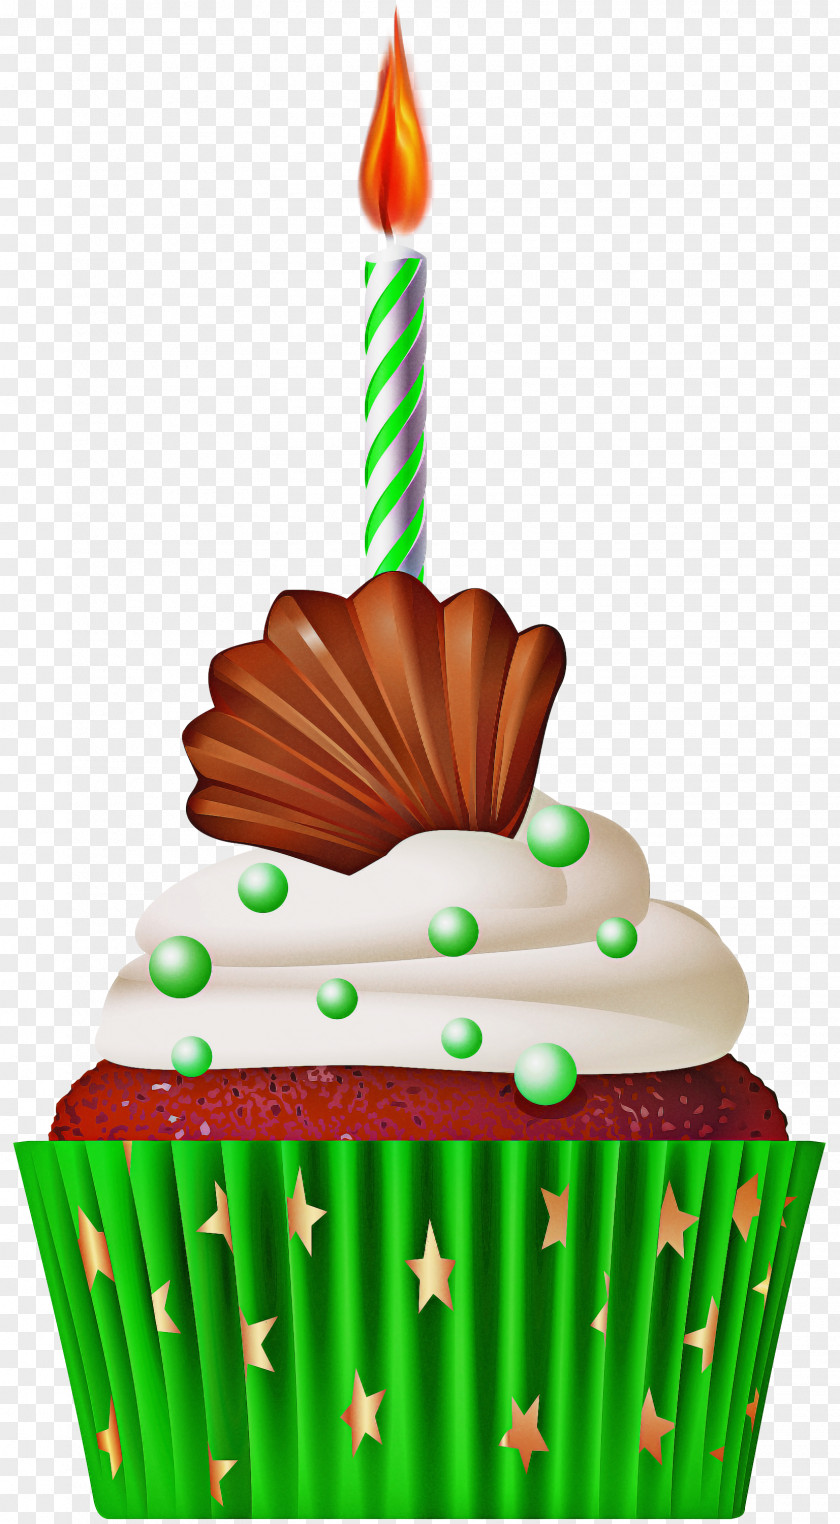 Carrot Cake Cookware And Bakeware Cartoon Birthday PNG